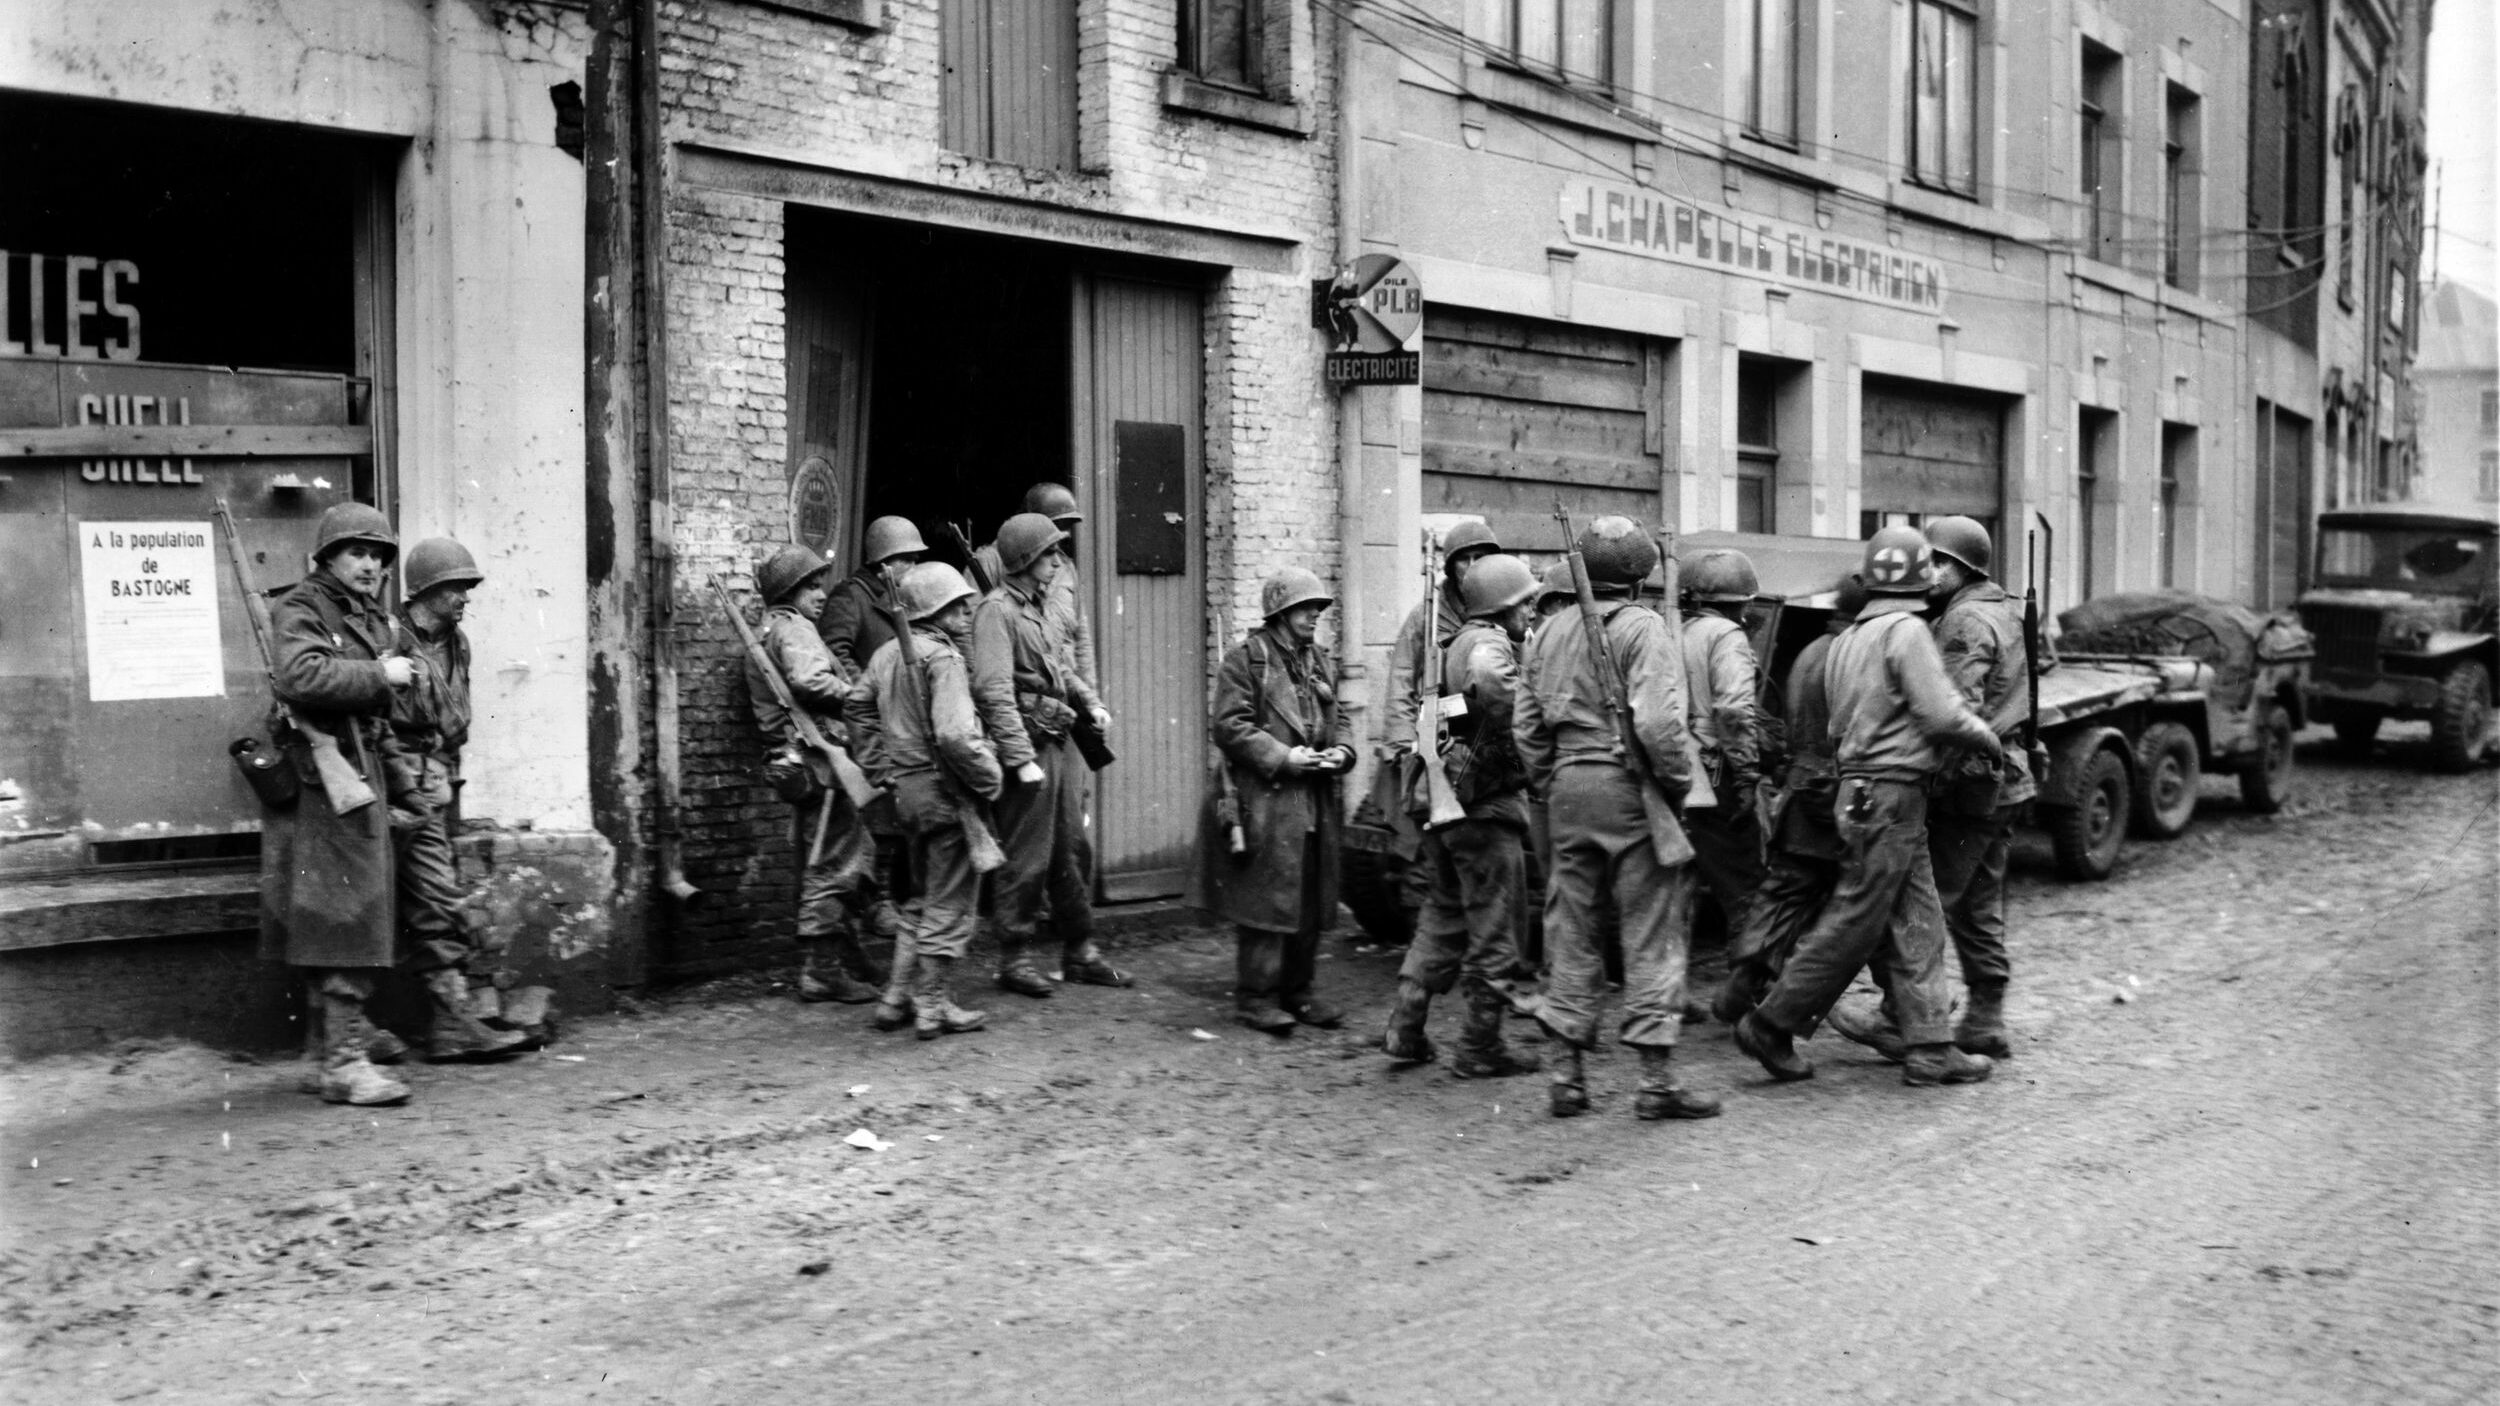 28th Division soldiers who avoided capture as their positions were overrun congregate in Bastogne. One of the soldiers is carrying a Browning Automatic Rifle (BAR), while others shoulder the M1 Garand, and M1 carbine.